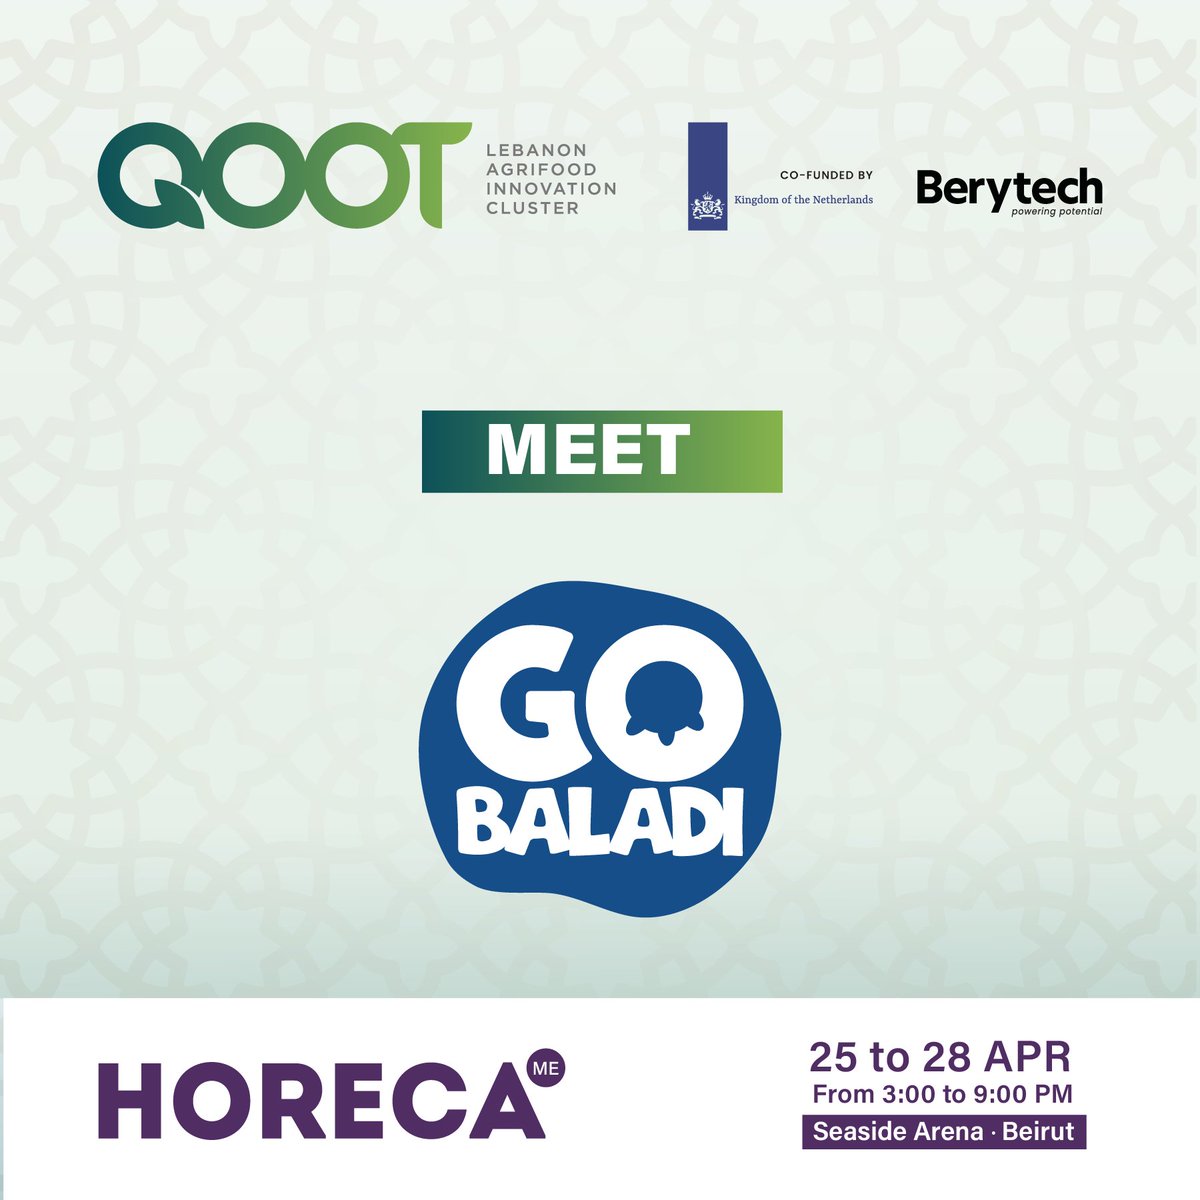 Go Baladi is one of the many cluster members showcasing their products at the QOOT Cluster space in HORECA 2023. 
Come check them out on April 25 – 28 from 3 to 9 pm at the Seaside Arena, Beirut.

qoot.org/qoot-cluster-s…

@HorecaConnects #HORECALebanon #QOOTinHORECA